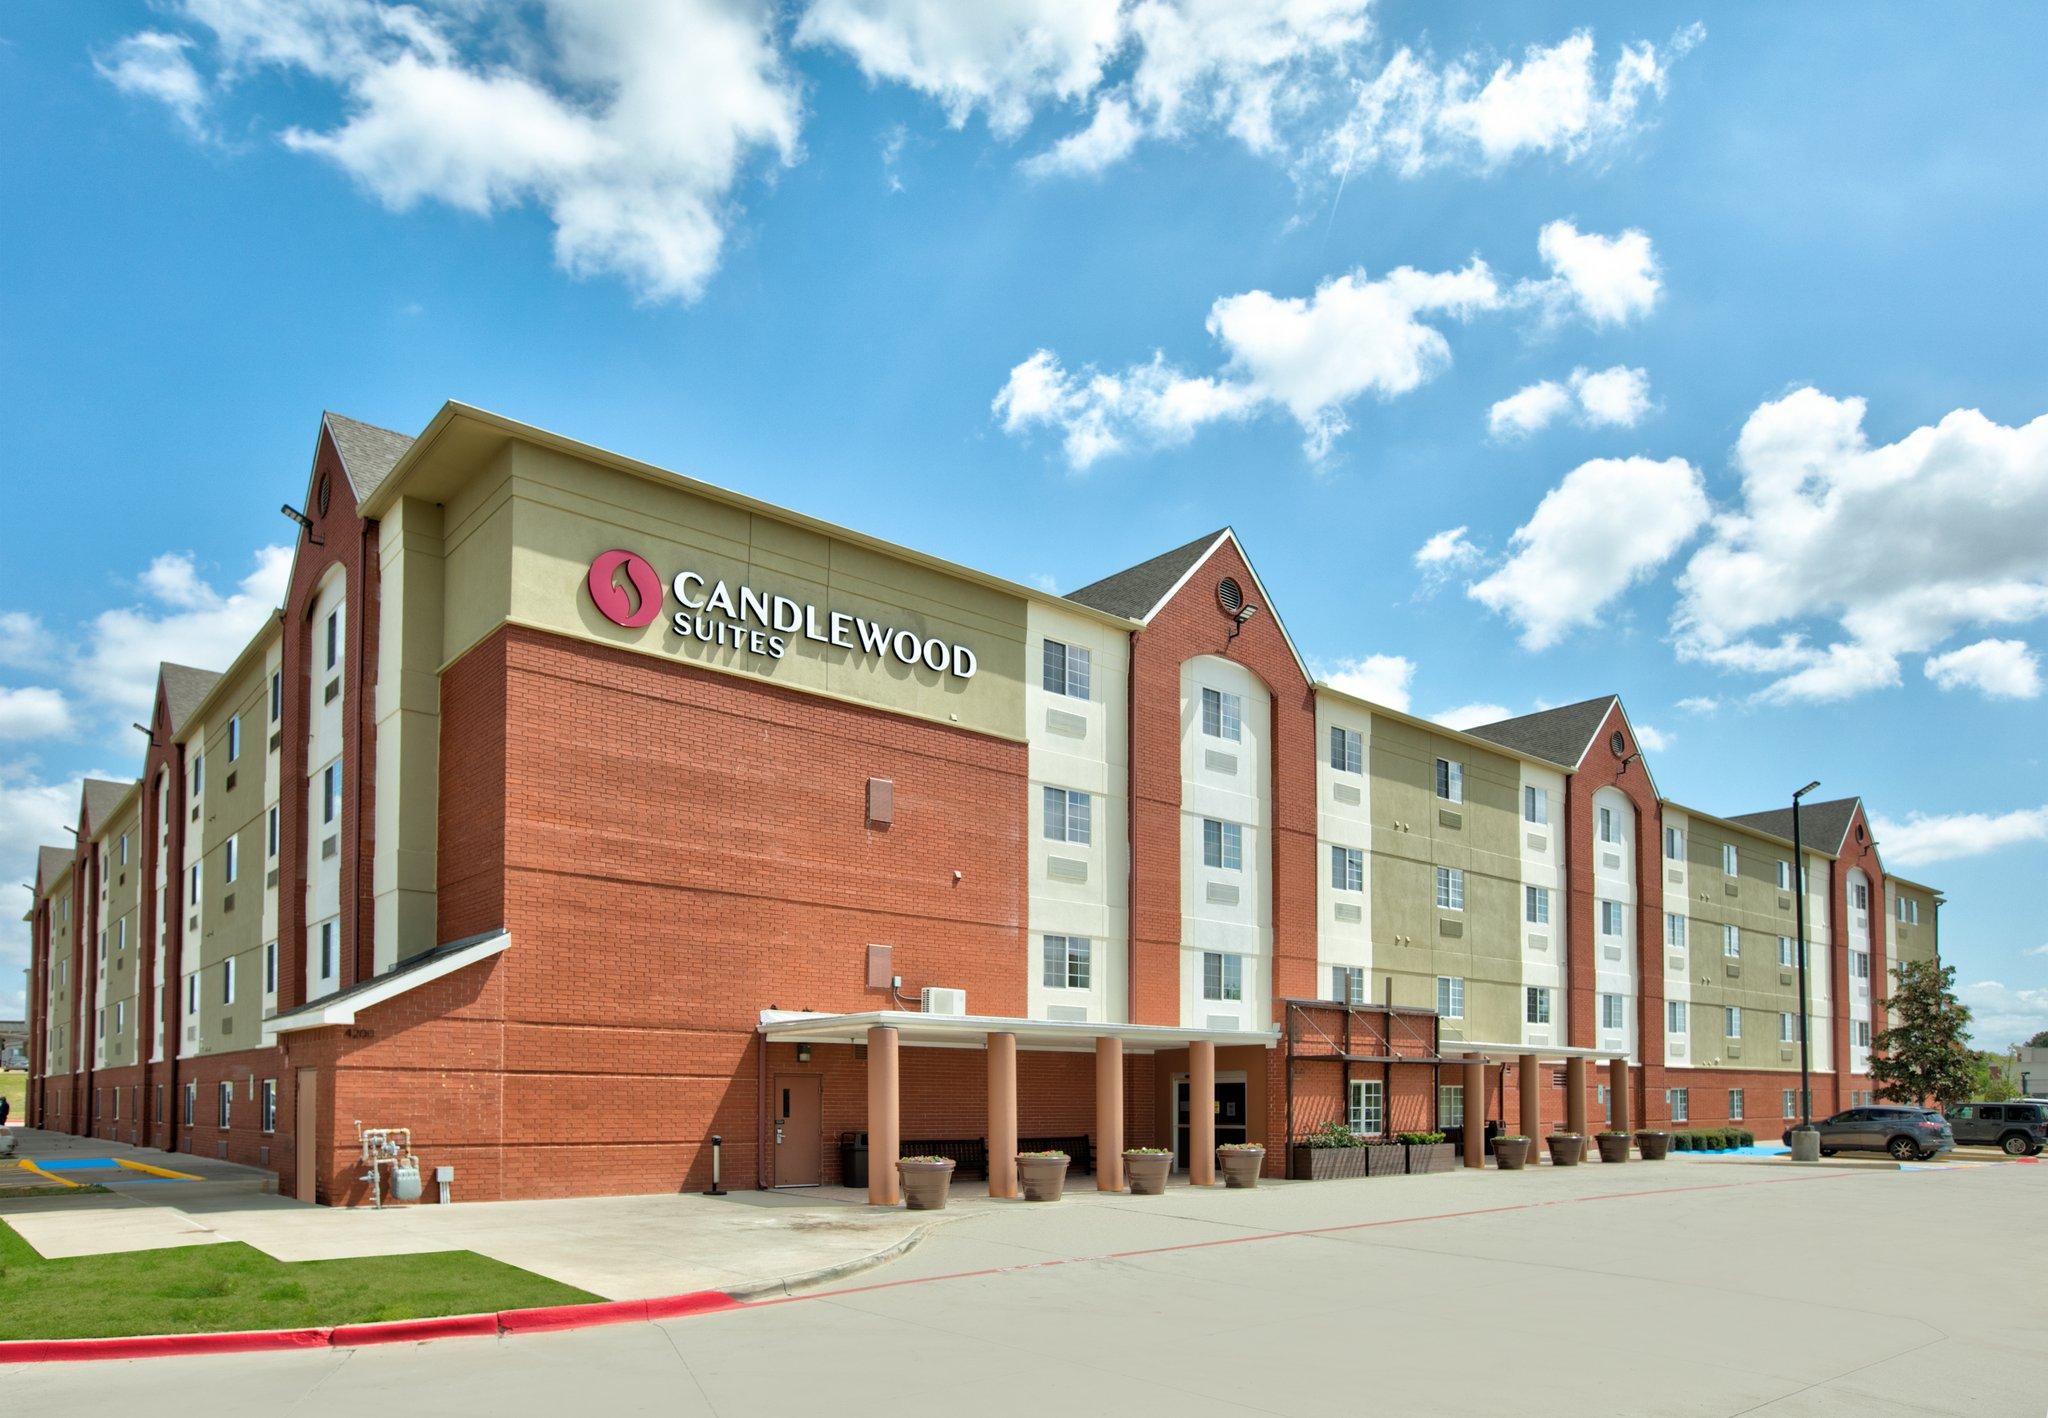 Candlewood Suites Dfw South in Fort Worth, TX